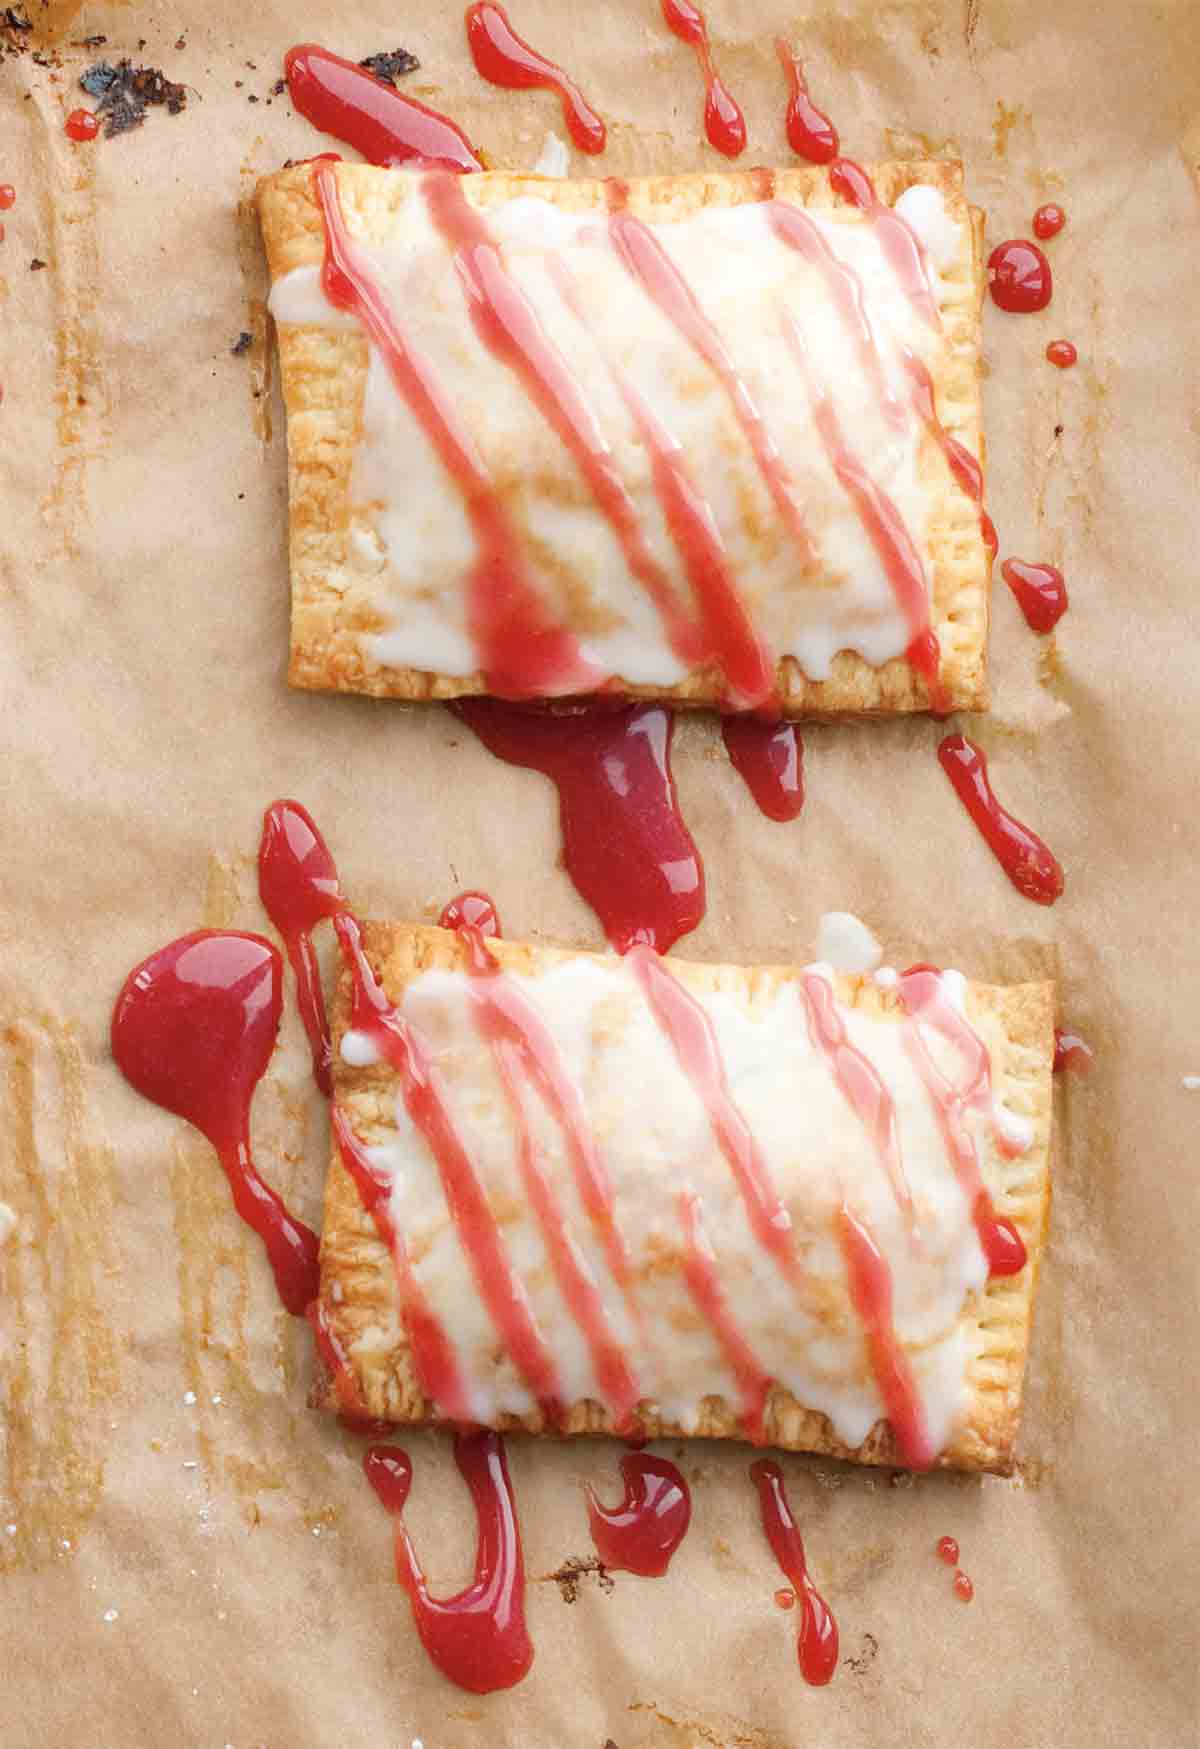 Two homemade toaster tarts on a sheet of parchment drizzled with glaze.